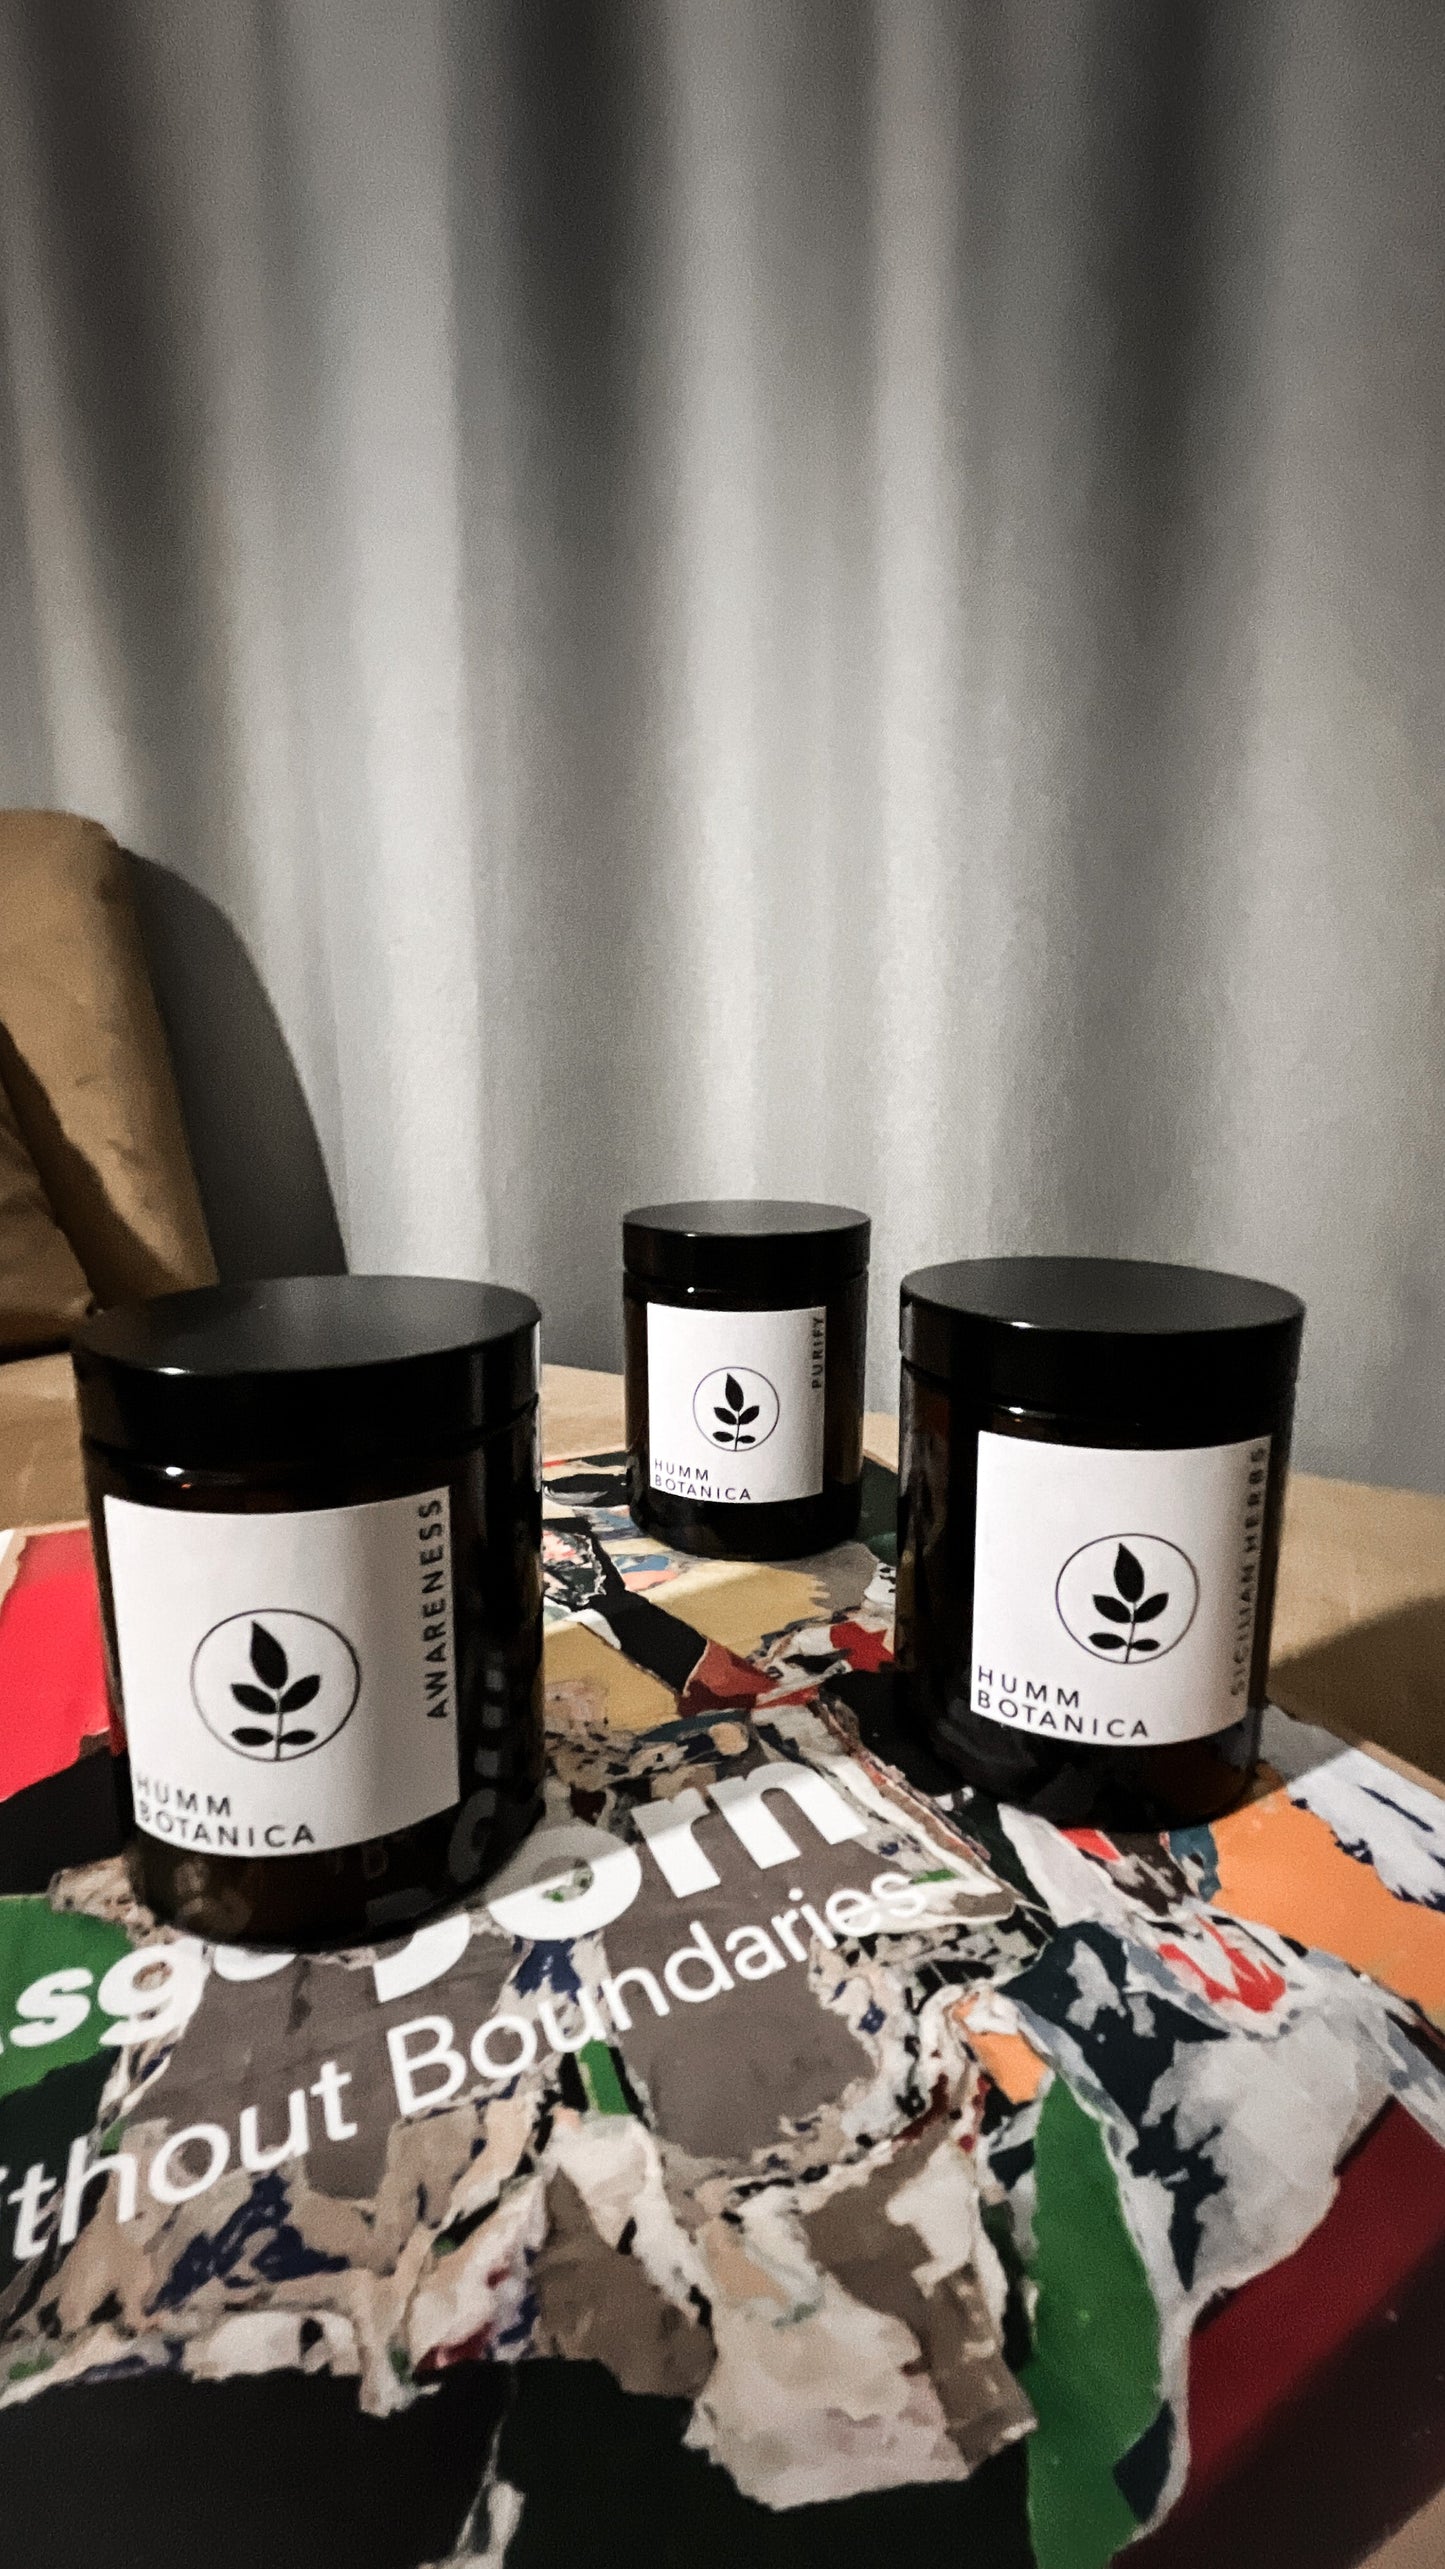 Candles and Art books. Humm Botanica All Natural Italian Design Candles 